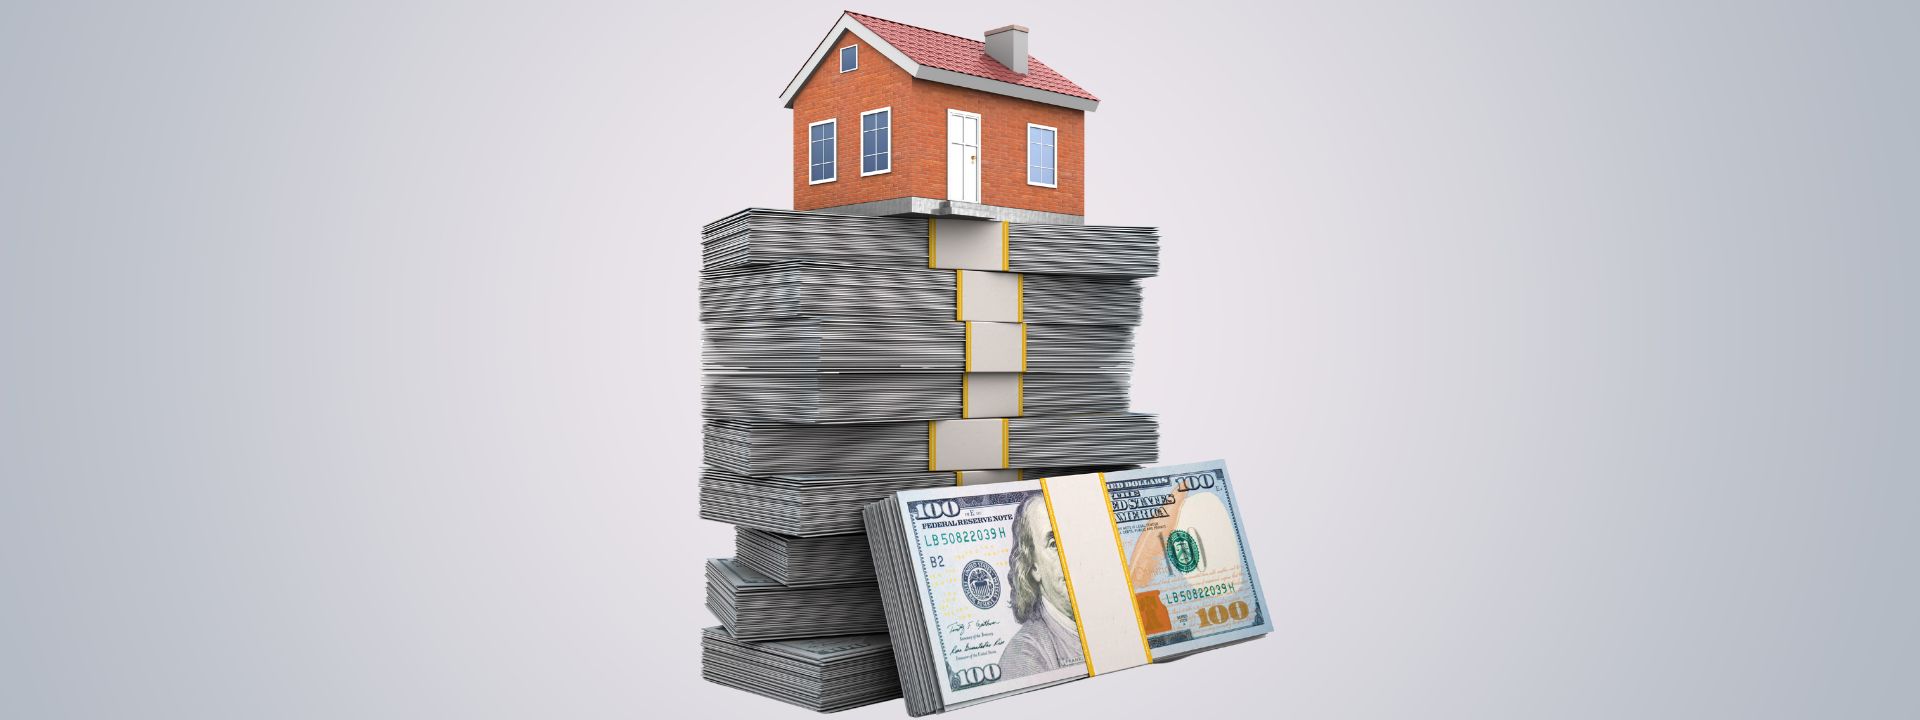 Home facing capital gains tax on real estate